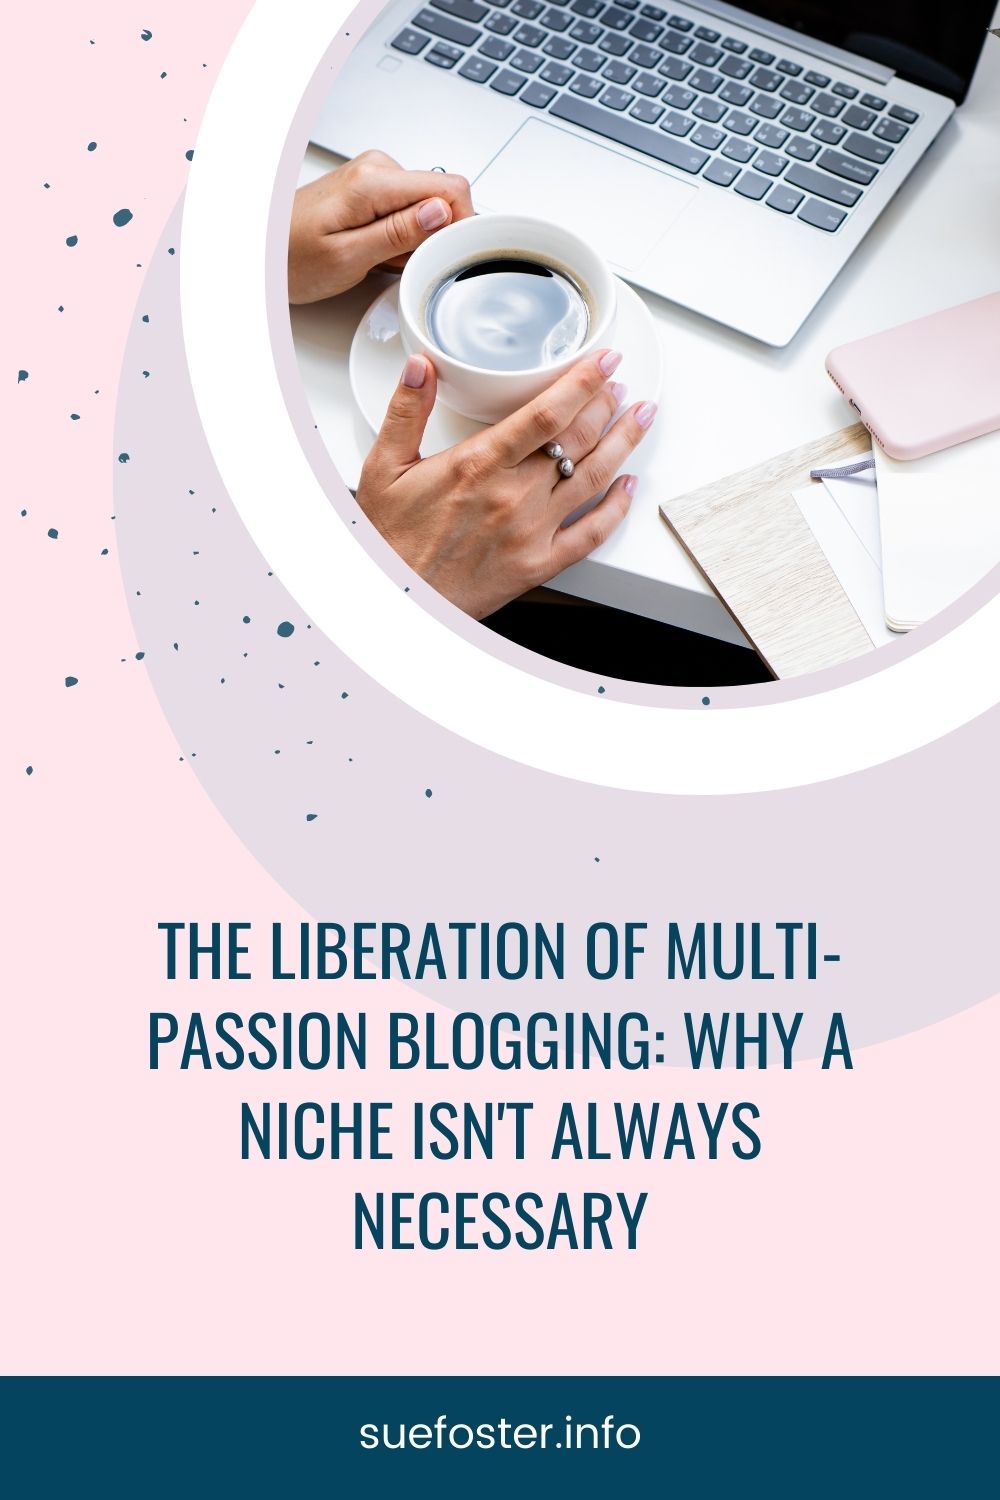 Explore why a niche isn't always necessary for successful blogging. Discover the benefits of a multi-passion approach, including personal branding, creativity, a wider audience reach, and future-proofing your blog